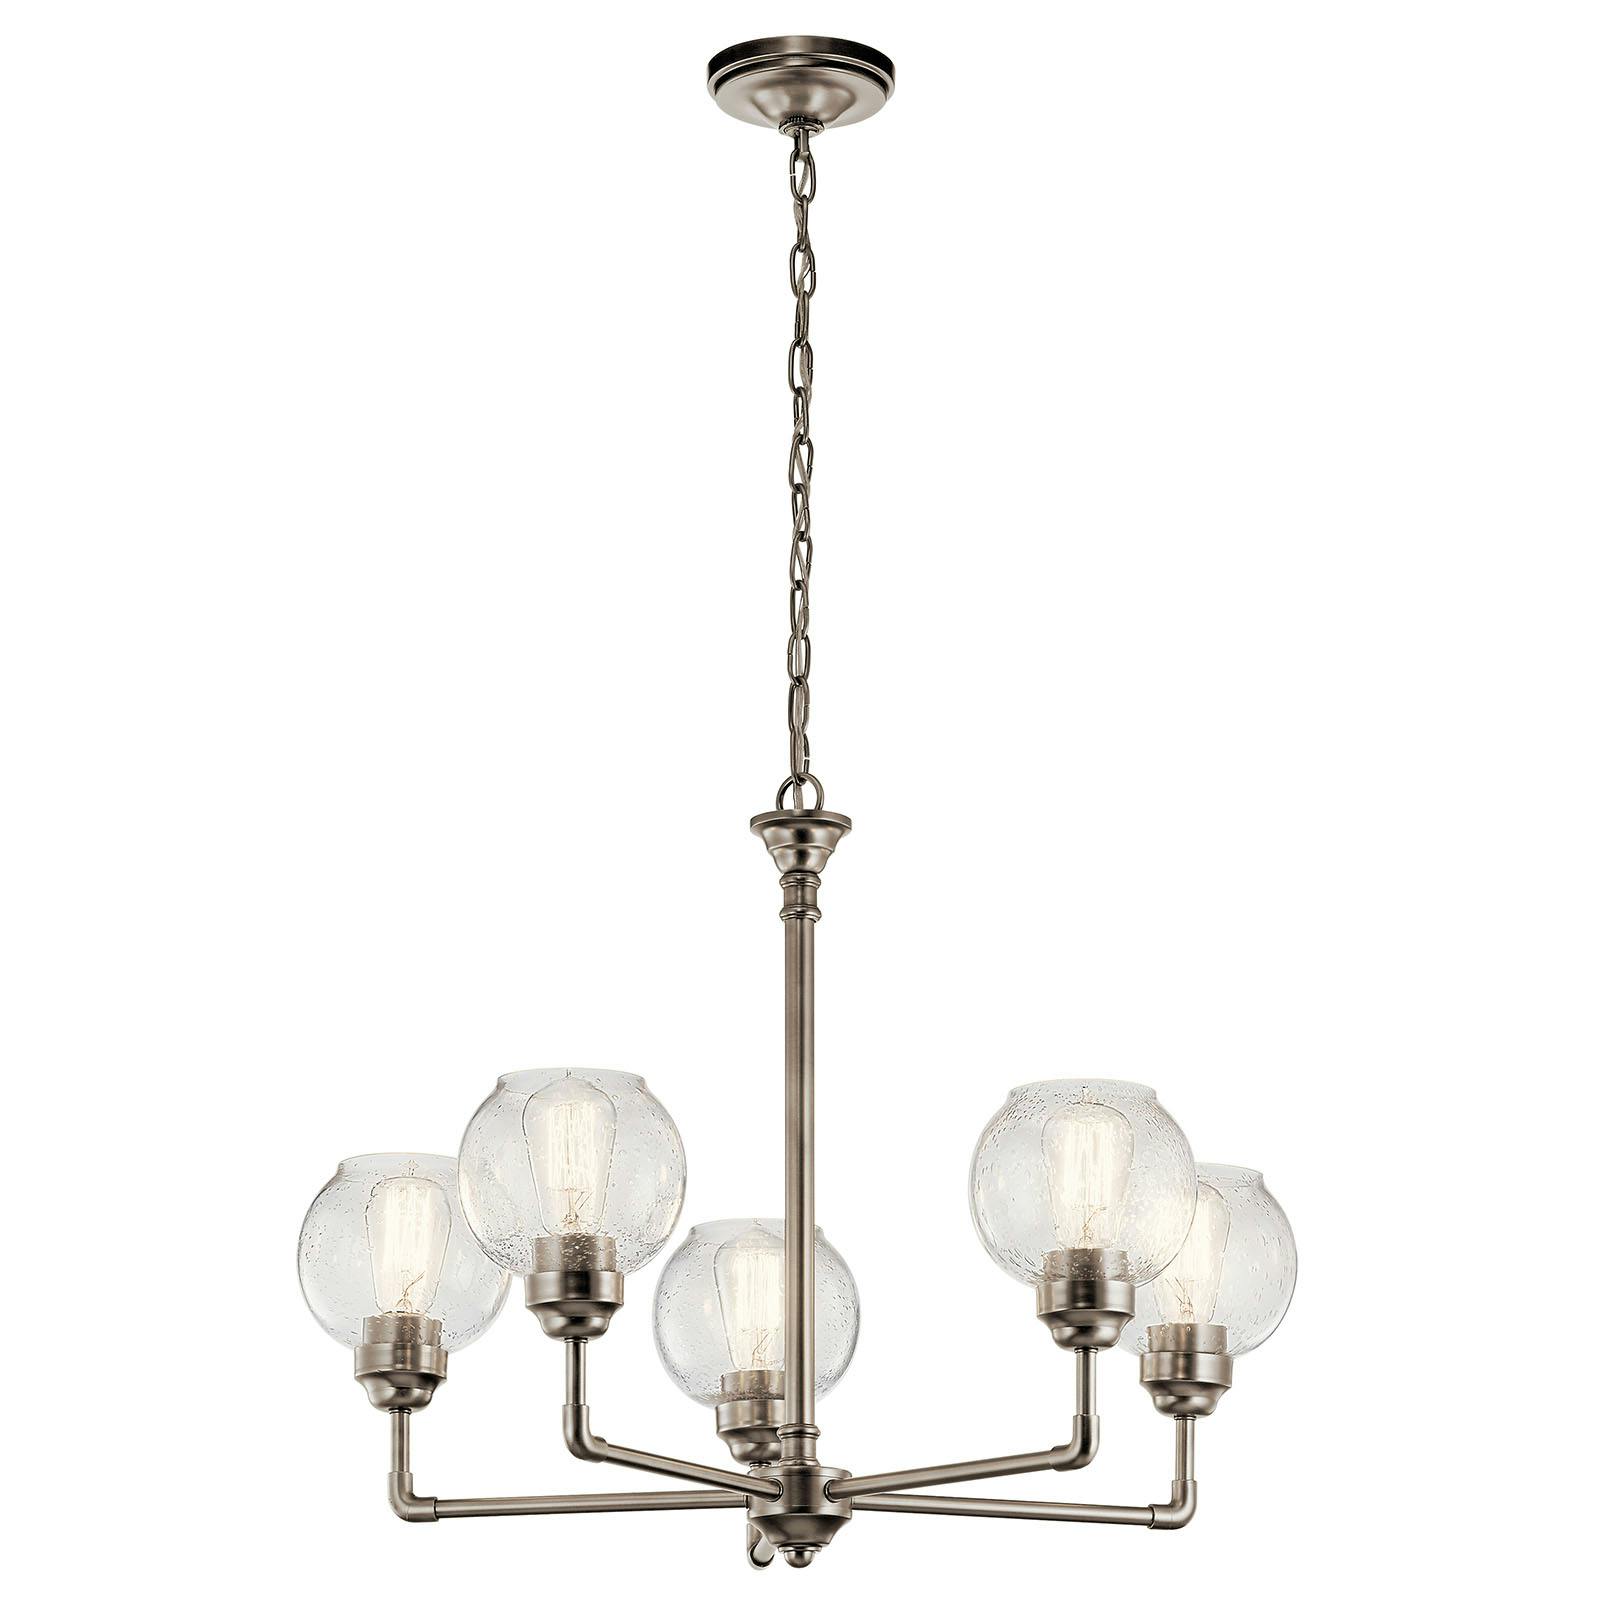 Niles 5 Light Chandelier Antique Pewter on a white background